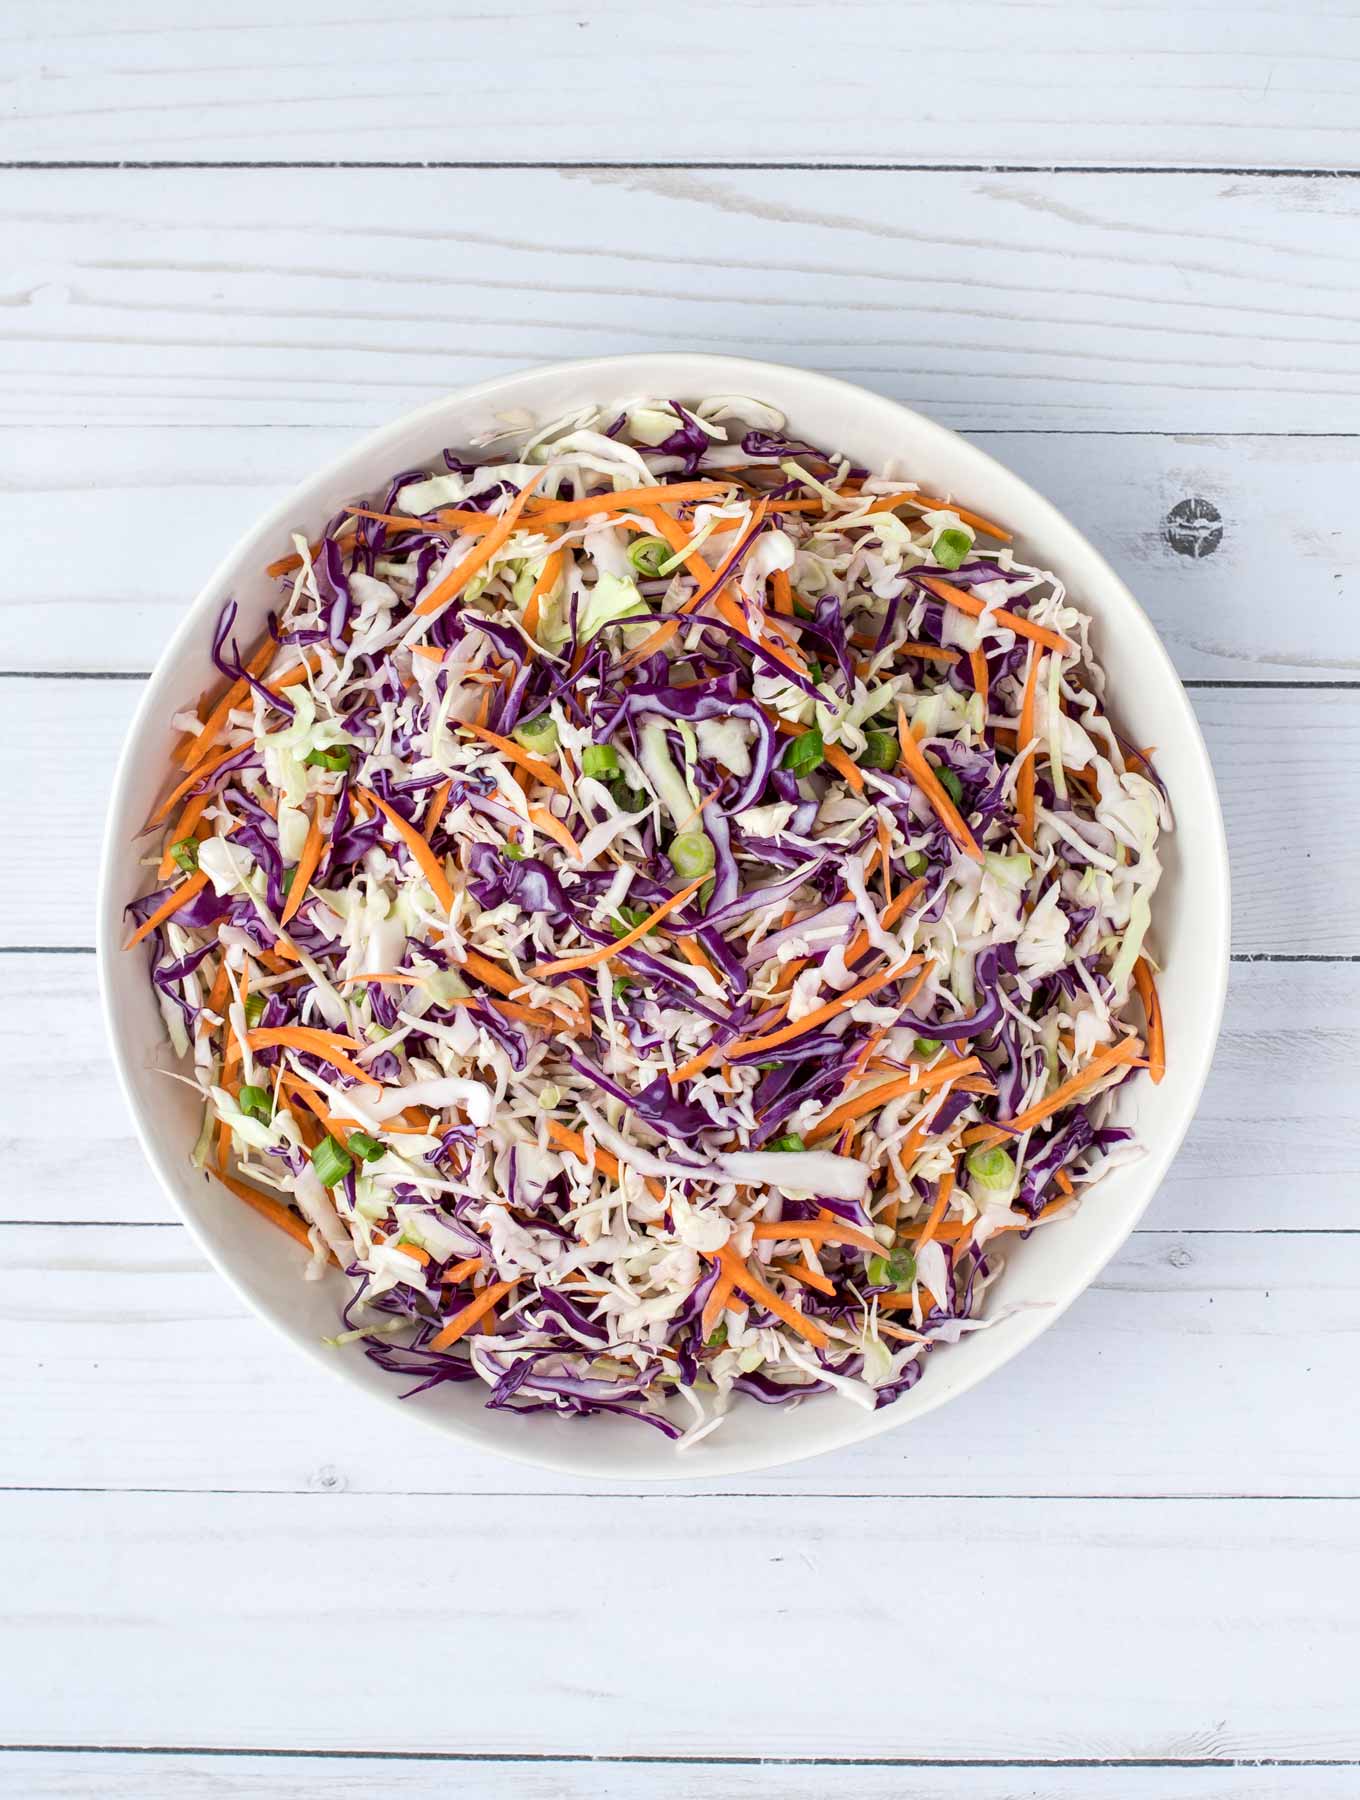 A bowl of colorful slaw